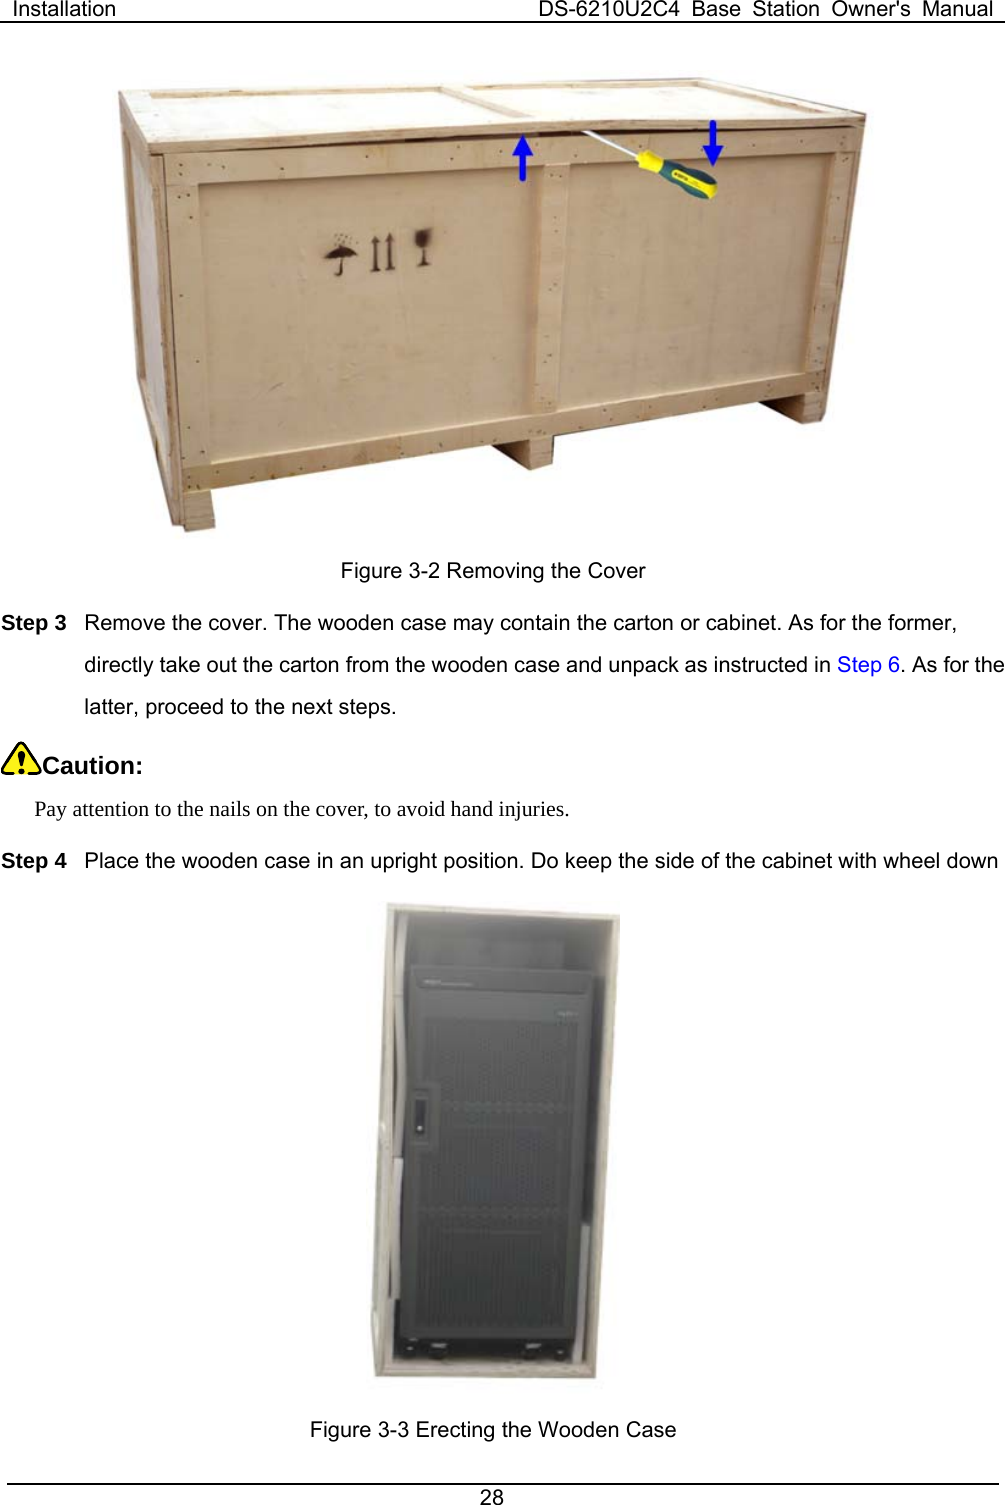 Installation  DS-6210U2C4 Base Station Owner&apos;s Manual 28   Figure 3-2 Removing the Cover Step 3  Remove the cover. The wooden case may contain the carton or cabinet. As for the former, directly take out the carton from the wooden case and unpack as instructed in Step 6. As for the latter, proceed to the next steps.   Caution:  Pay attention to the nails on the cover, to avoid hand injuries.   Step 4  Place the wooden case in an upright position. Do keep the side of the cabinet with wheel down    Figure 3-3 Erecting the Wooden Case   